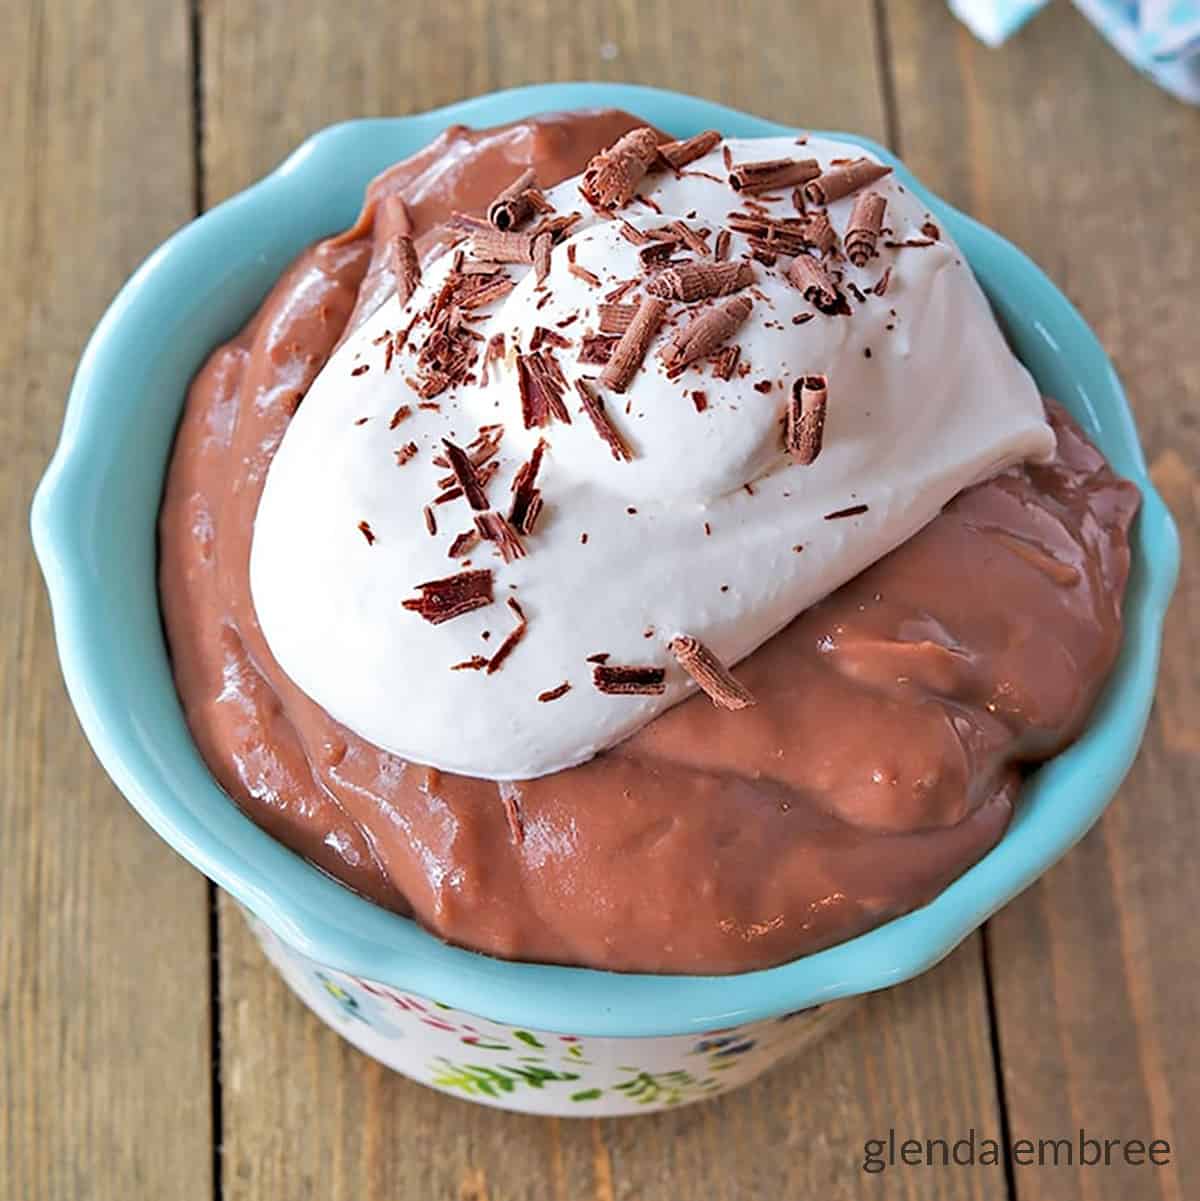 homemade chocolate pudding in a blue bowl on a wooden table